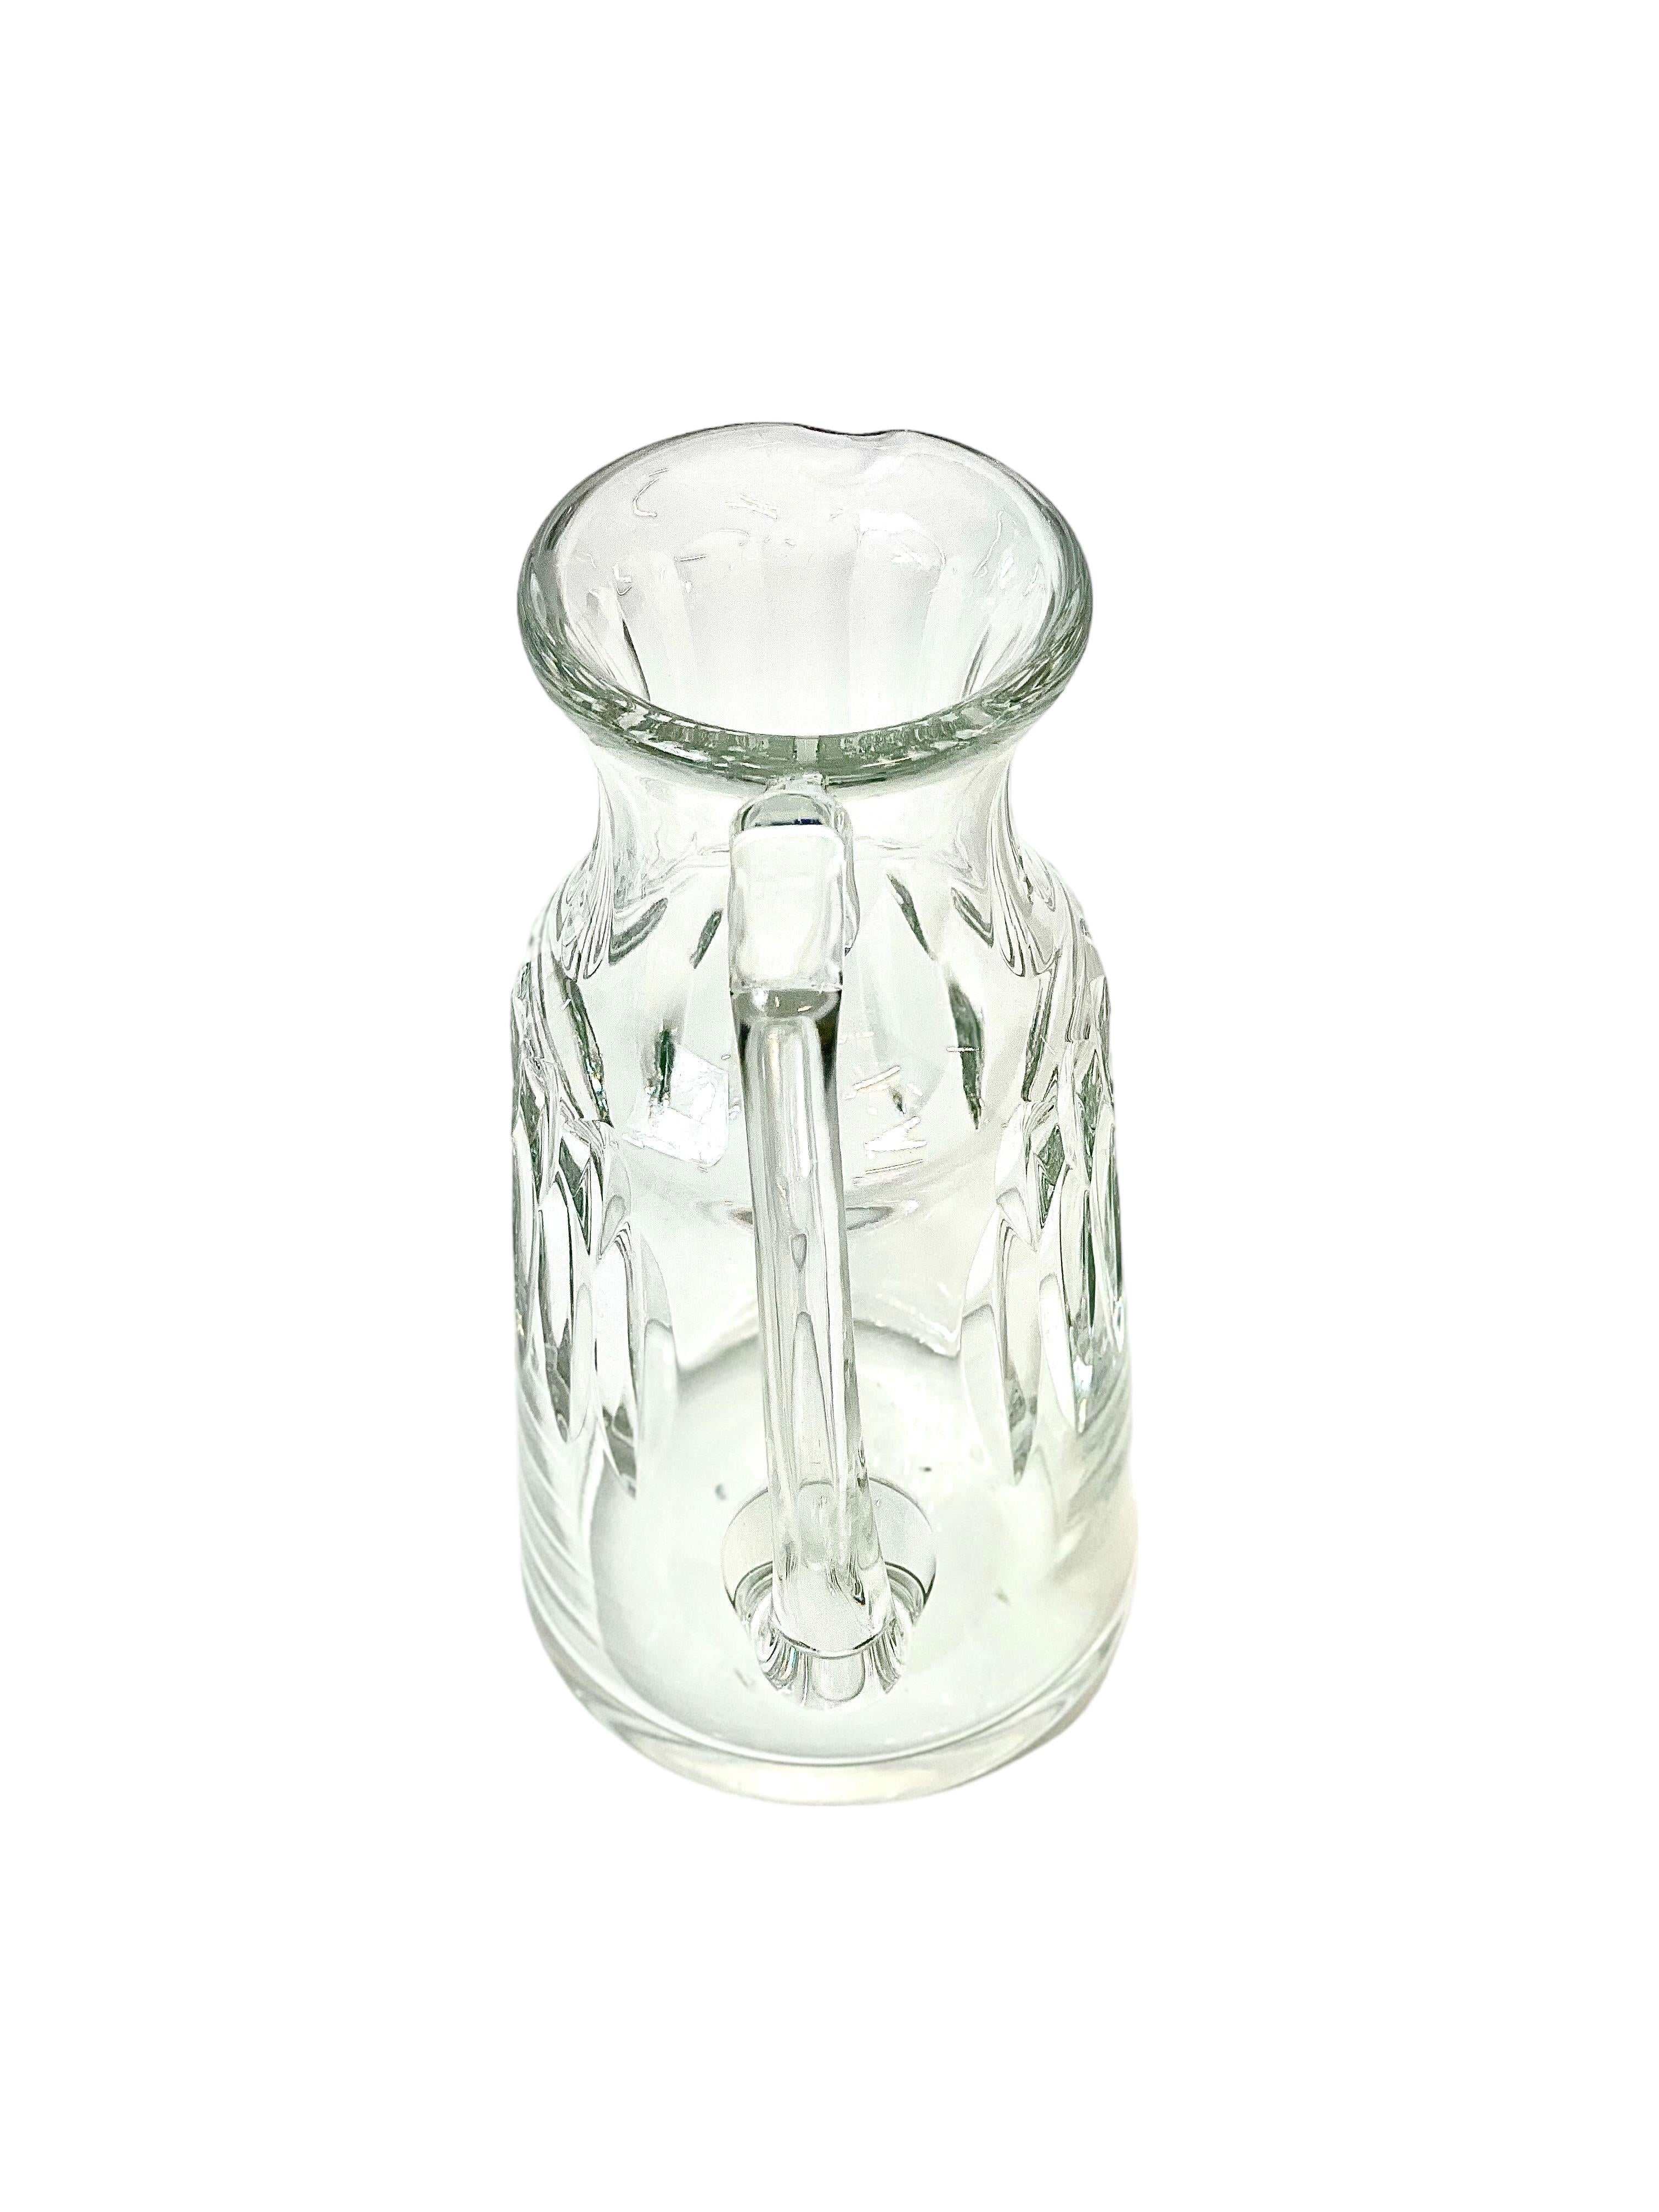 An elegant handcrafted water pitcher (or carafe) from the renowned house of Baccarat crystal. 
Part of the Assas pattern series, this slender water jug is both well-proportioned and highly functional, with a spout that pours beautifully and a